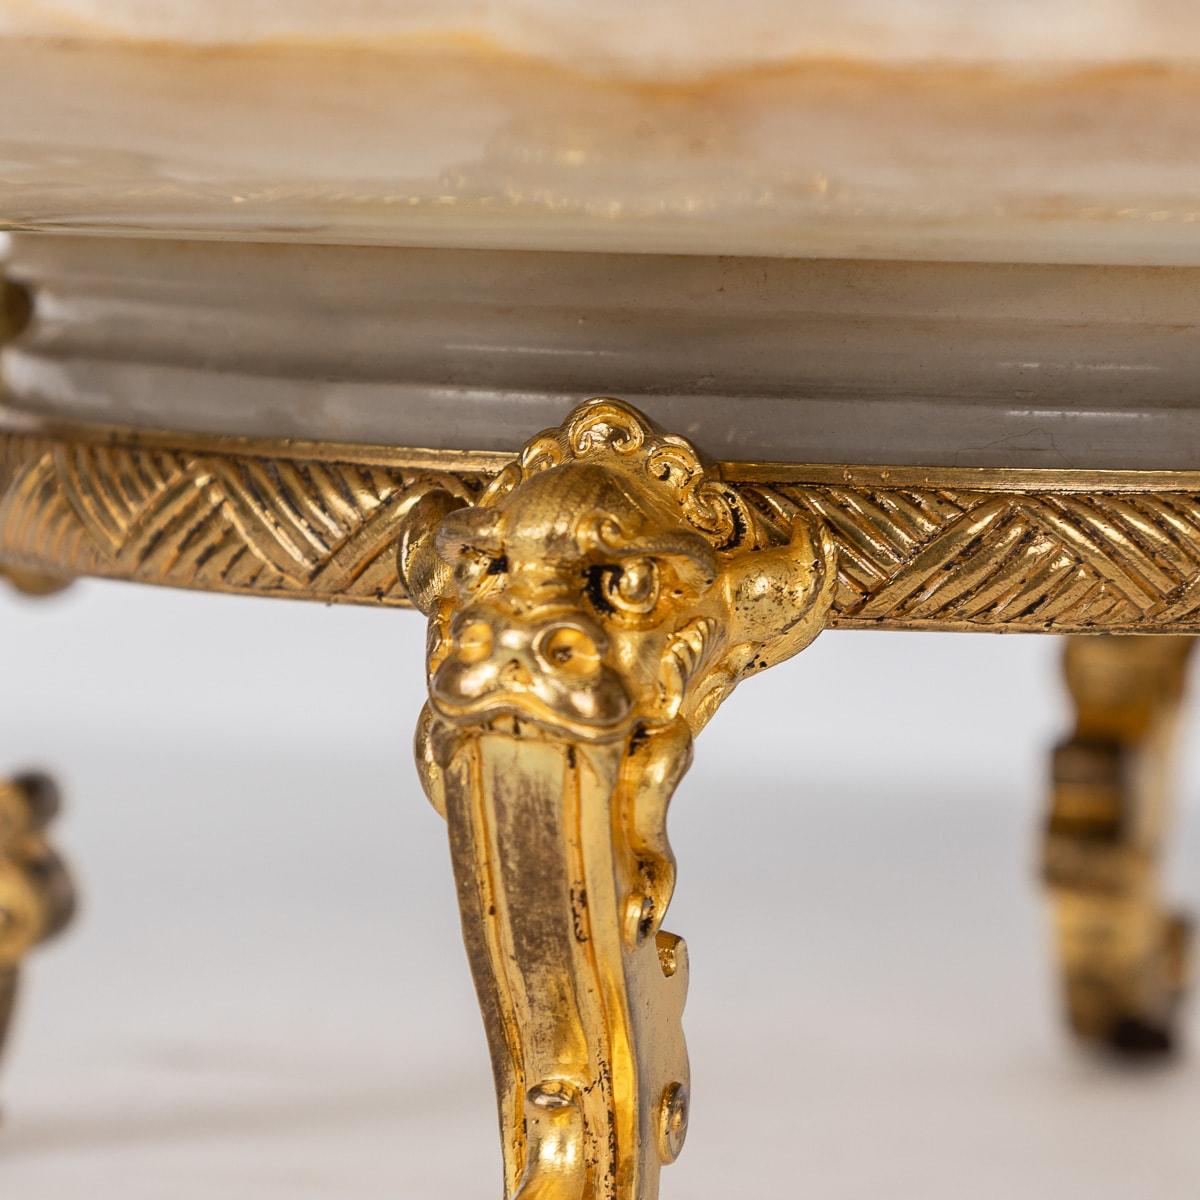 19th Century French Ormolu Mounted Onyx Marble & Enamel Centrepiece c.1880 For Sale 15